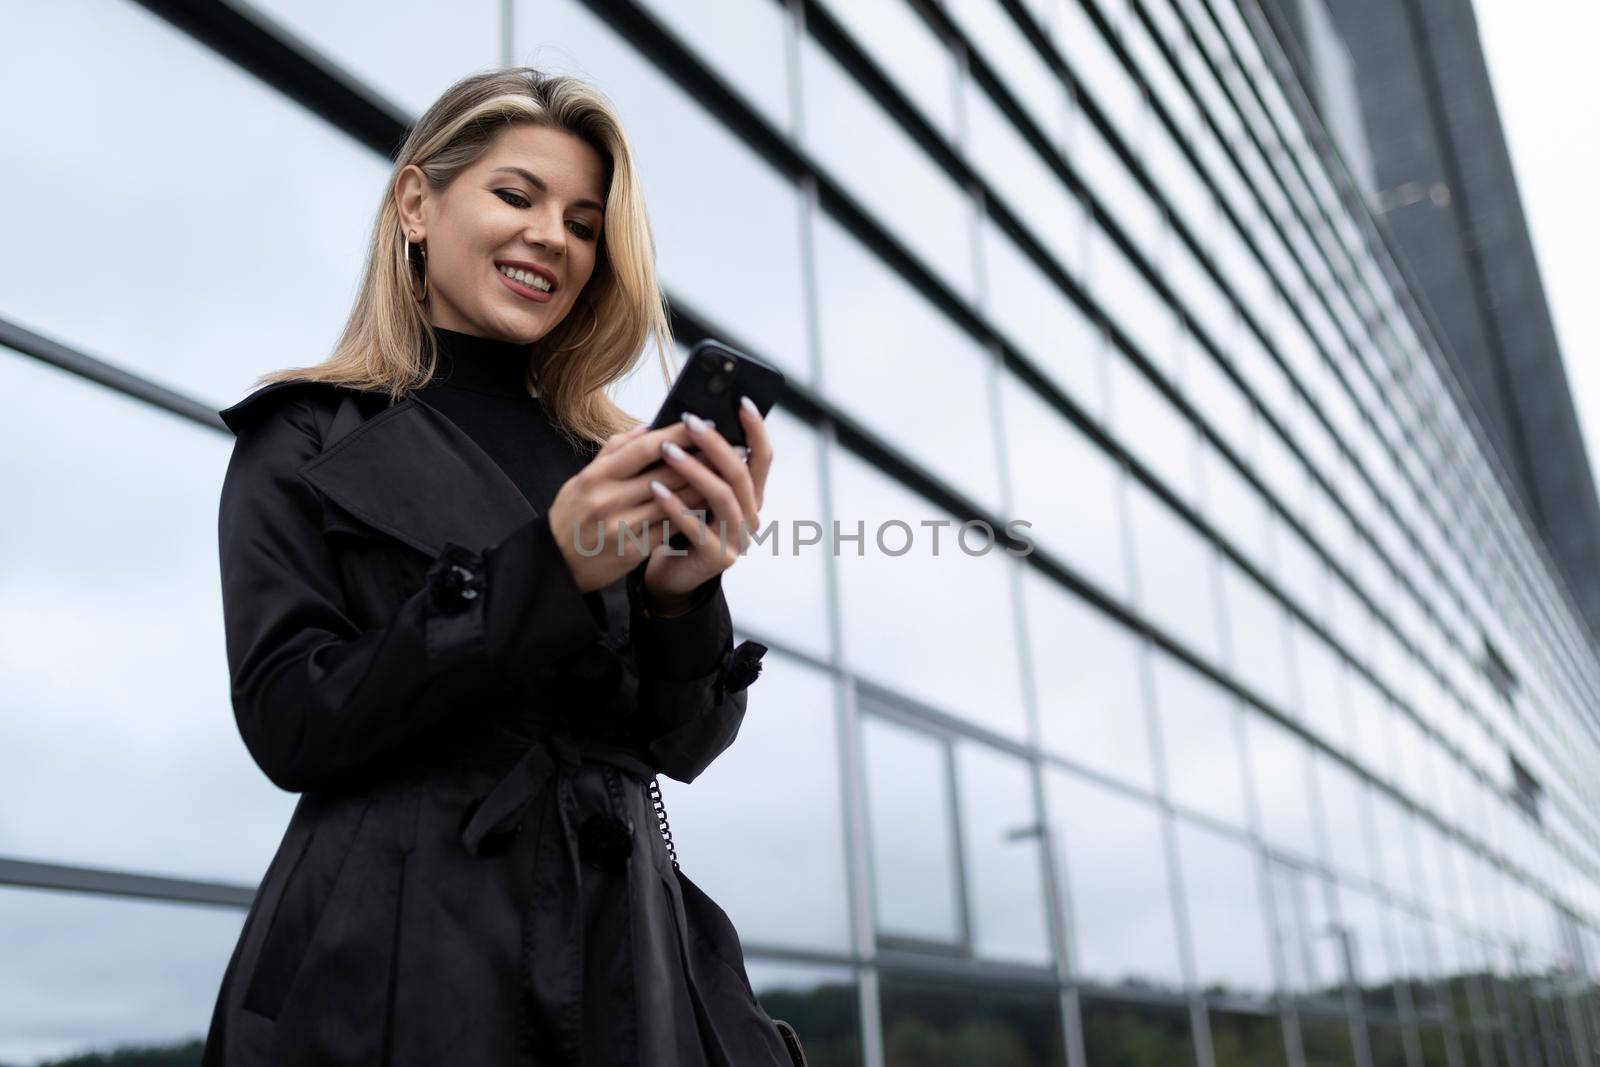 Middle-aged business woman with a mobile phone against the backdrop of an office building.